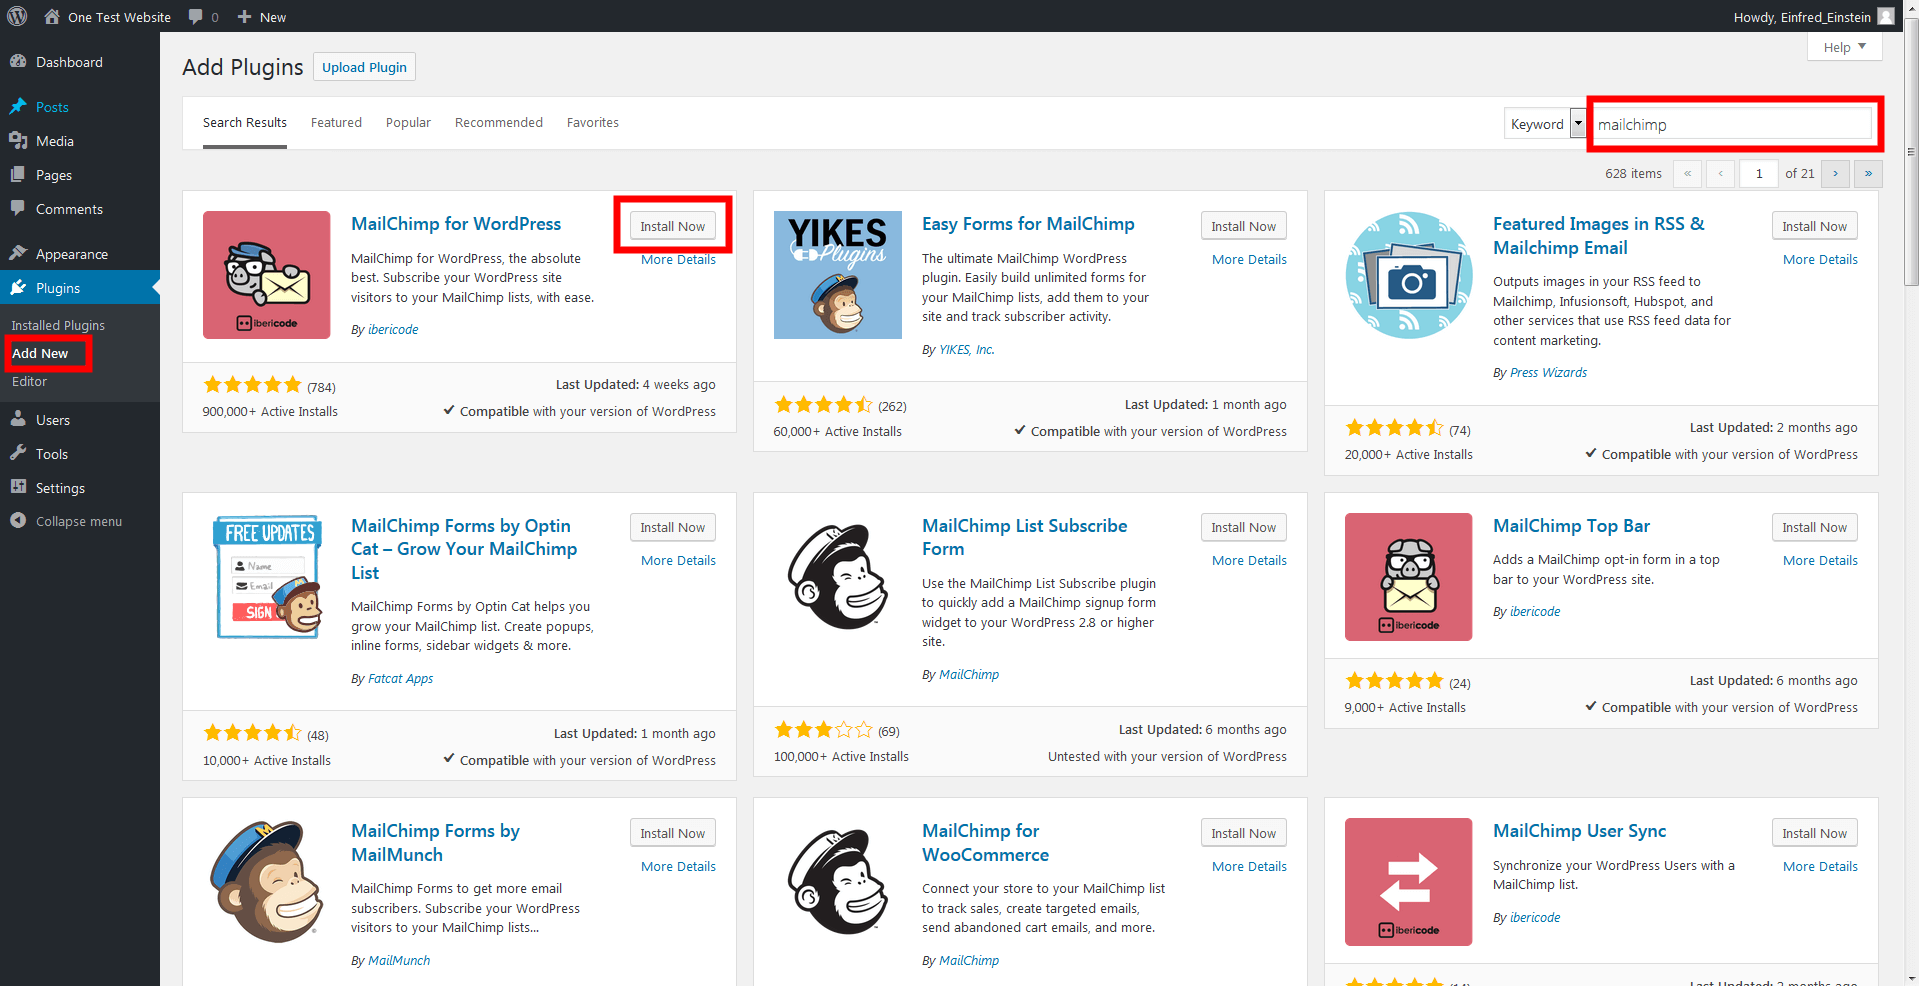 Overview of the plugins available when searching for ‘MailChimp’